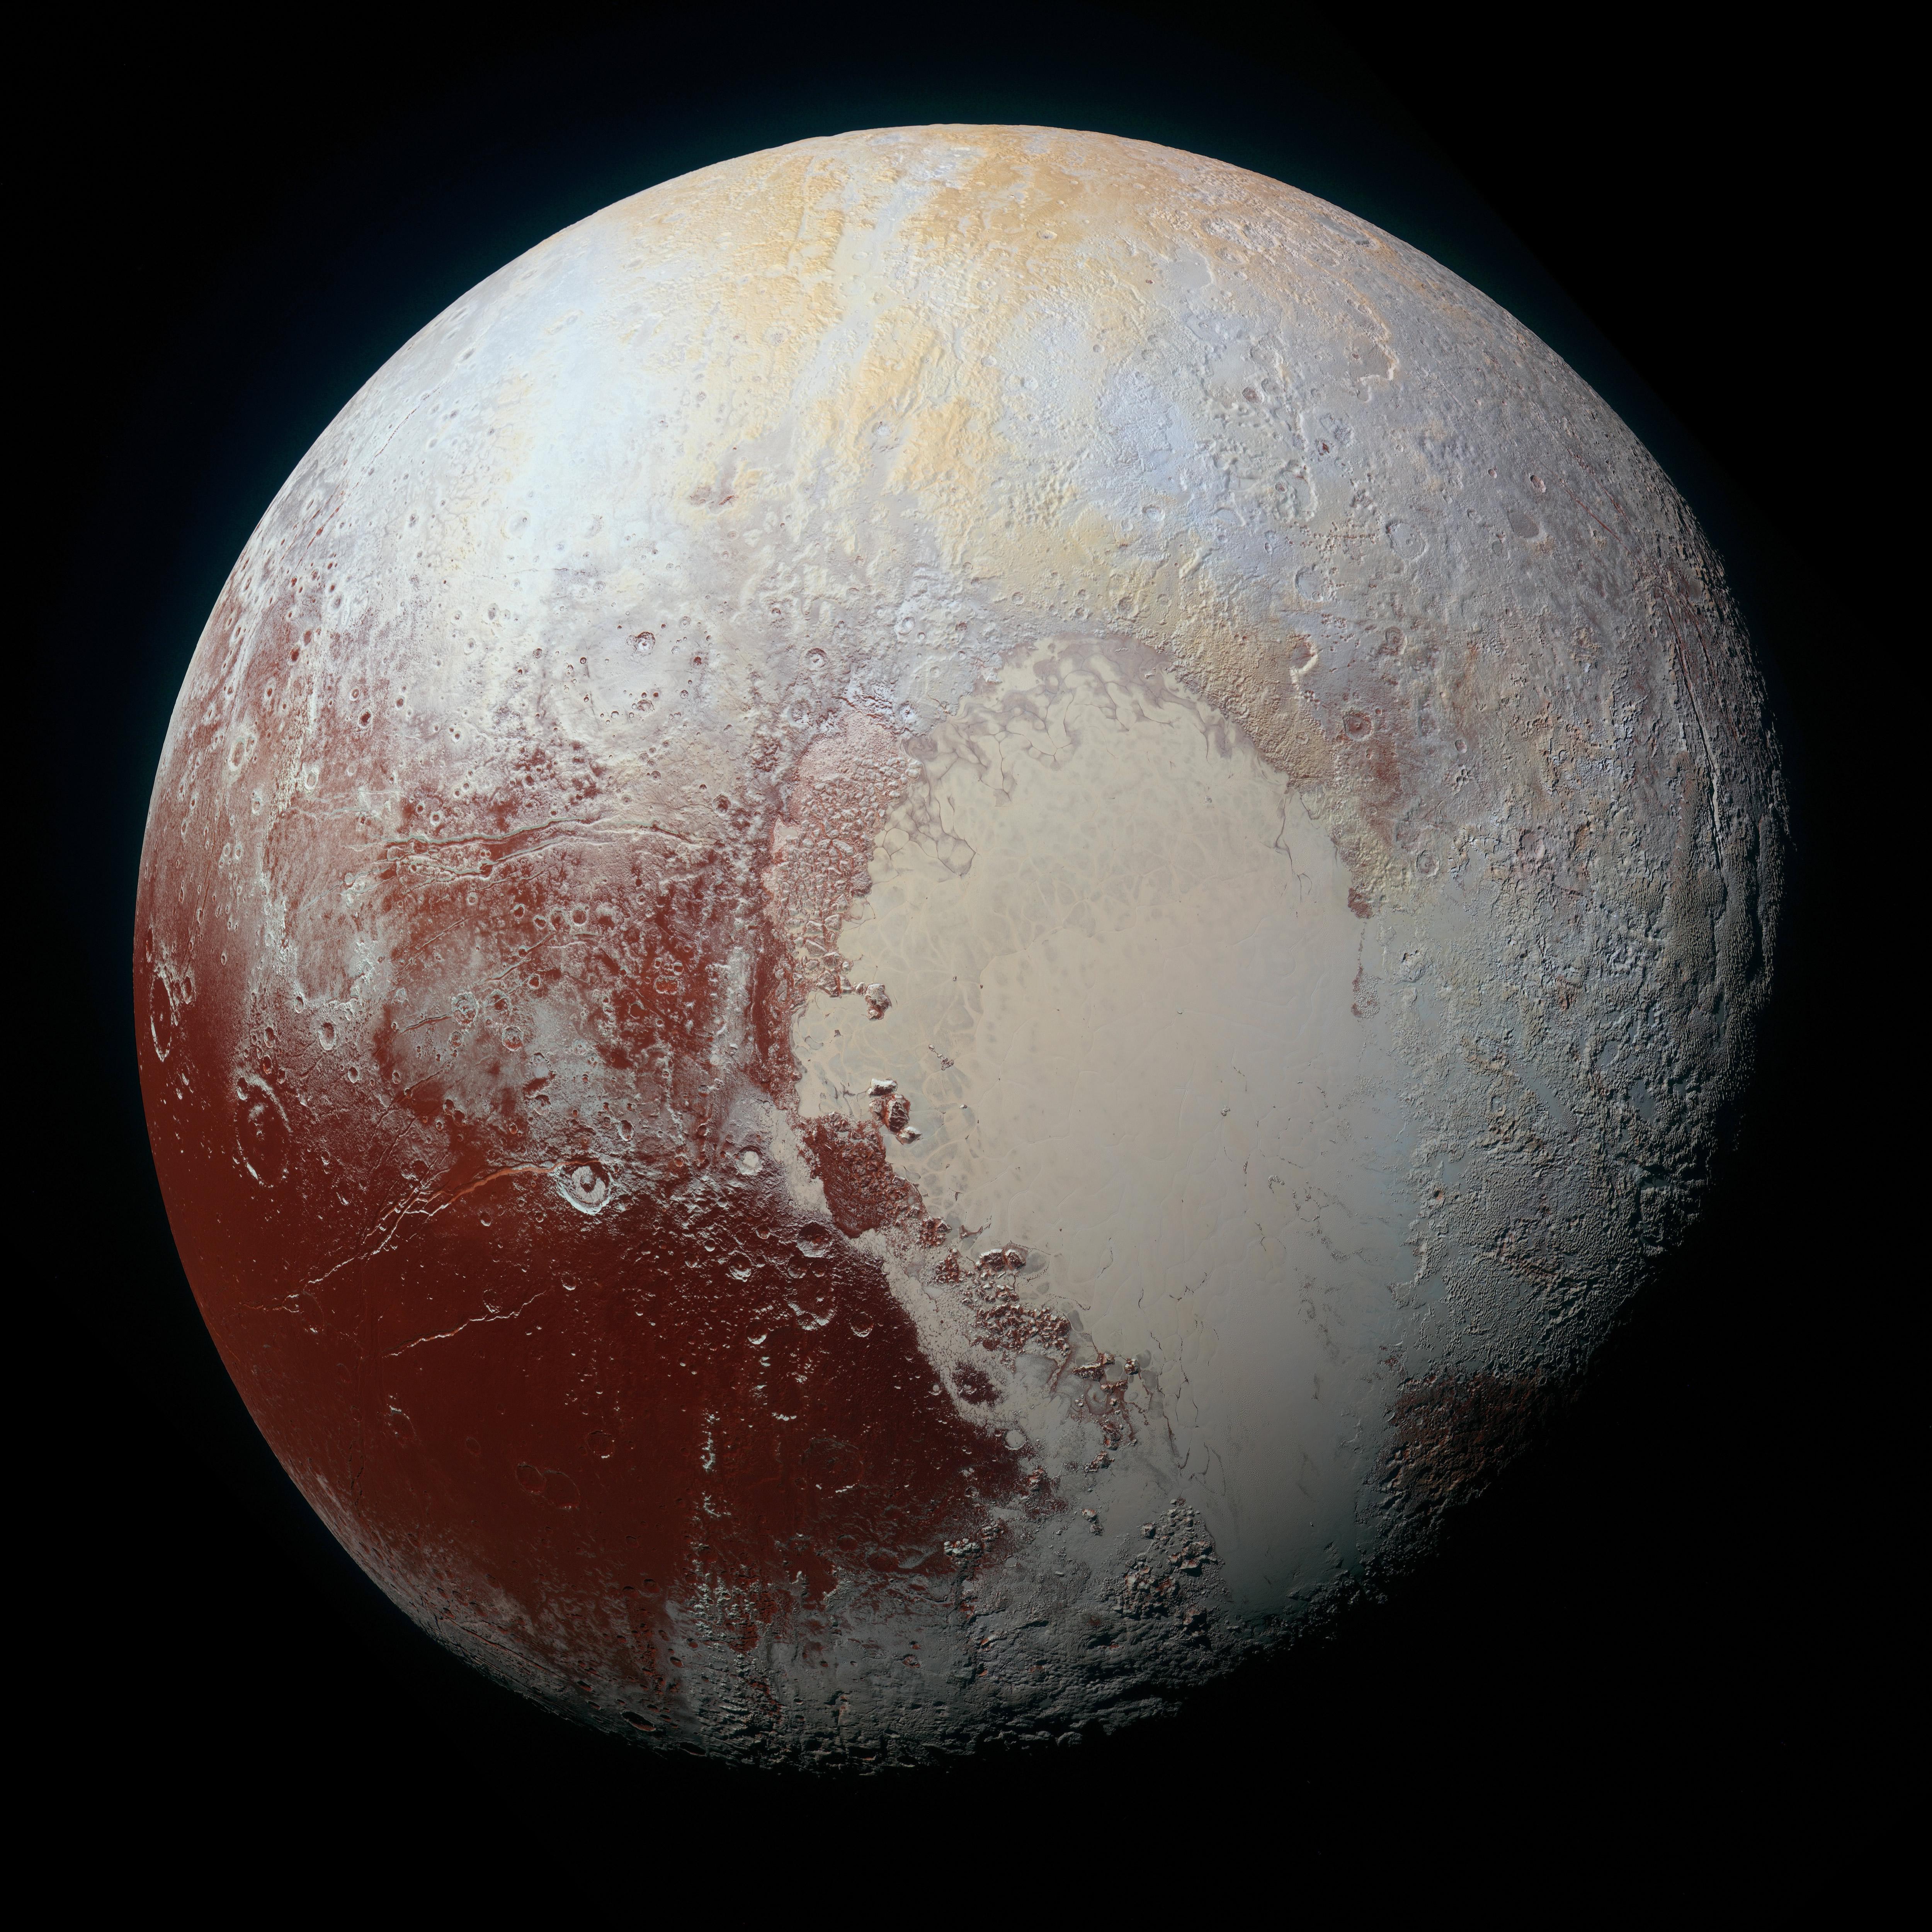 Image of Pluto in enhanced colour to bring out differences in surface composition. They include craters, ridges and plains.